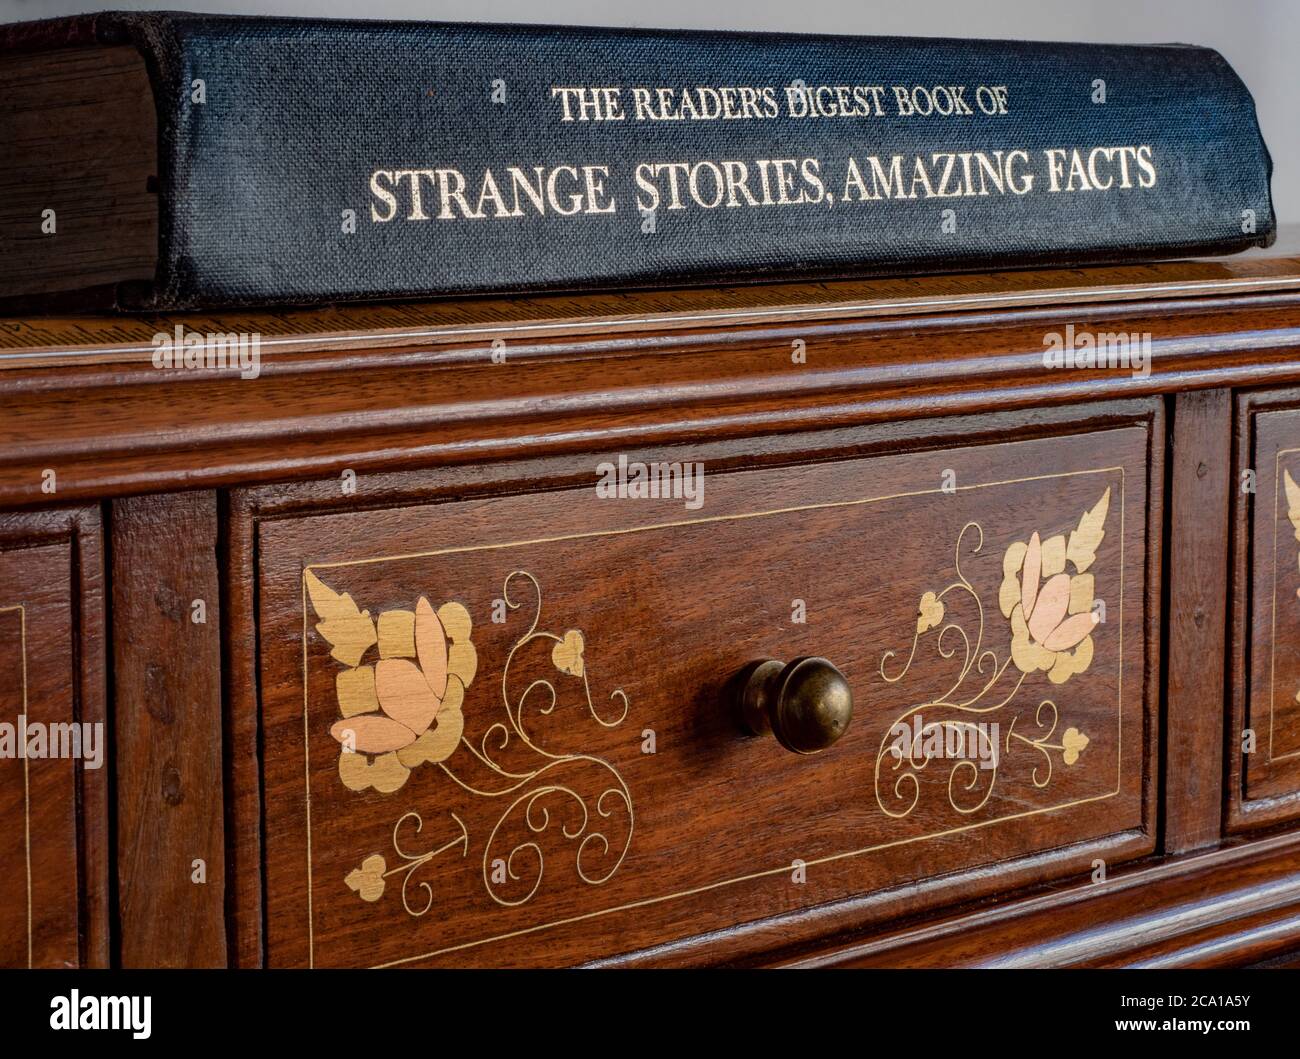 The Reader’s Digest book of Strange Stories, Amazing Facts (published 1976), in hard cover, on top of an ornate wooden desk. Stock Photo